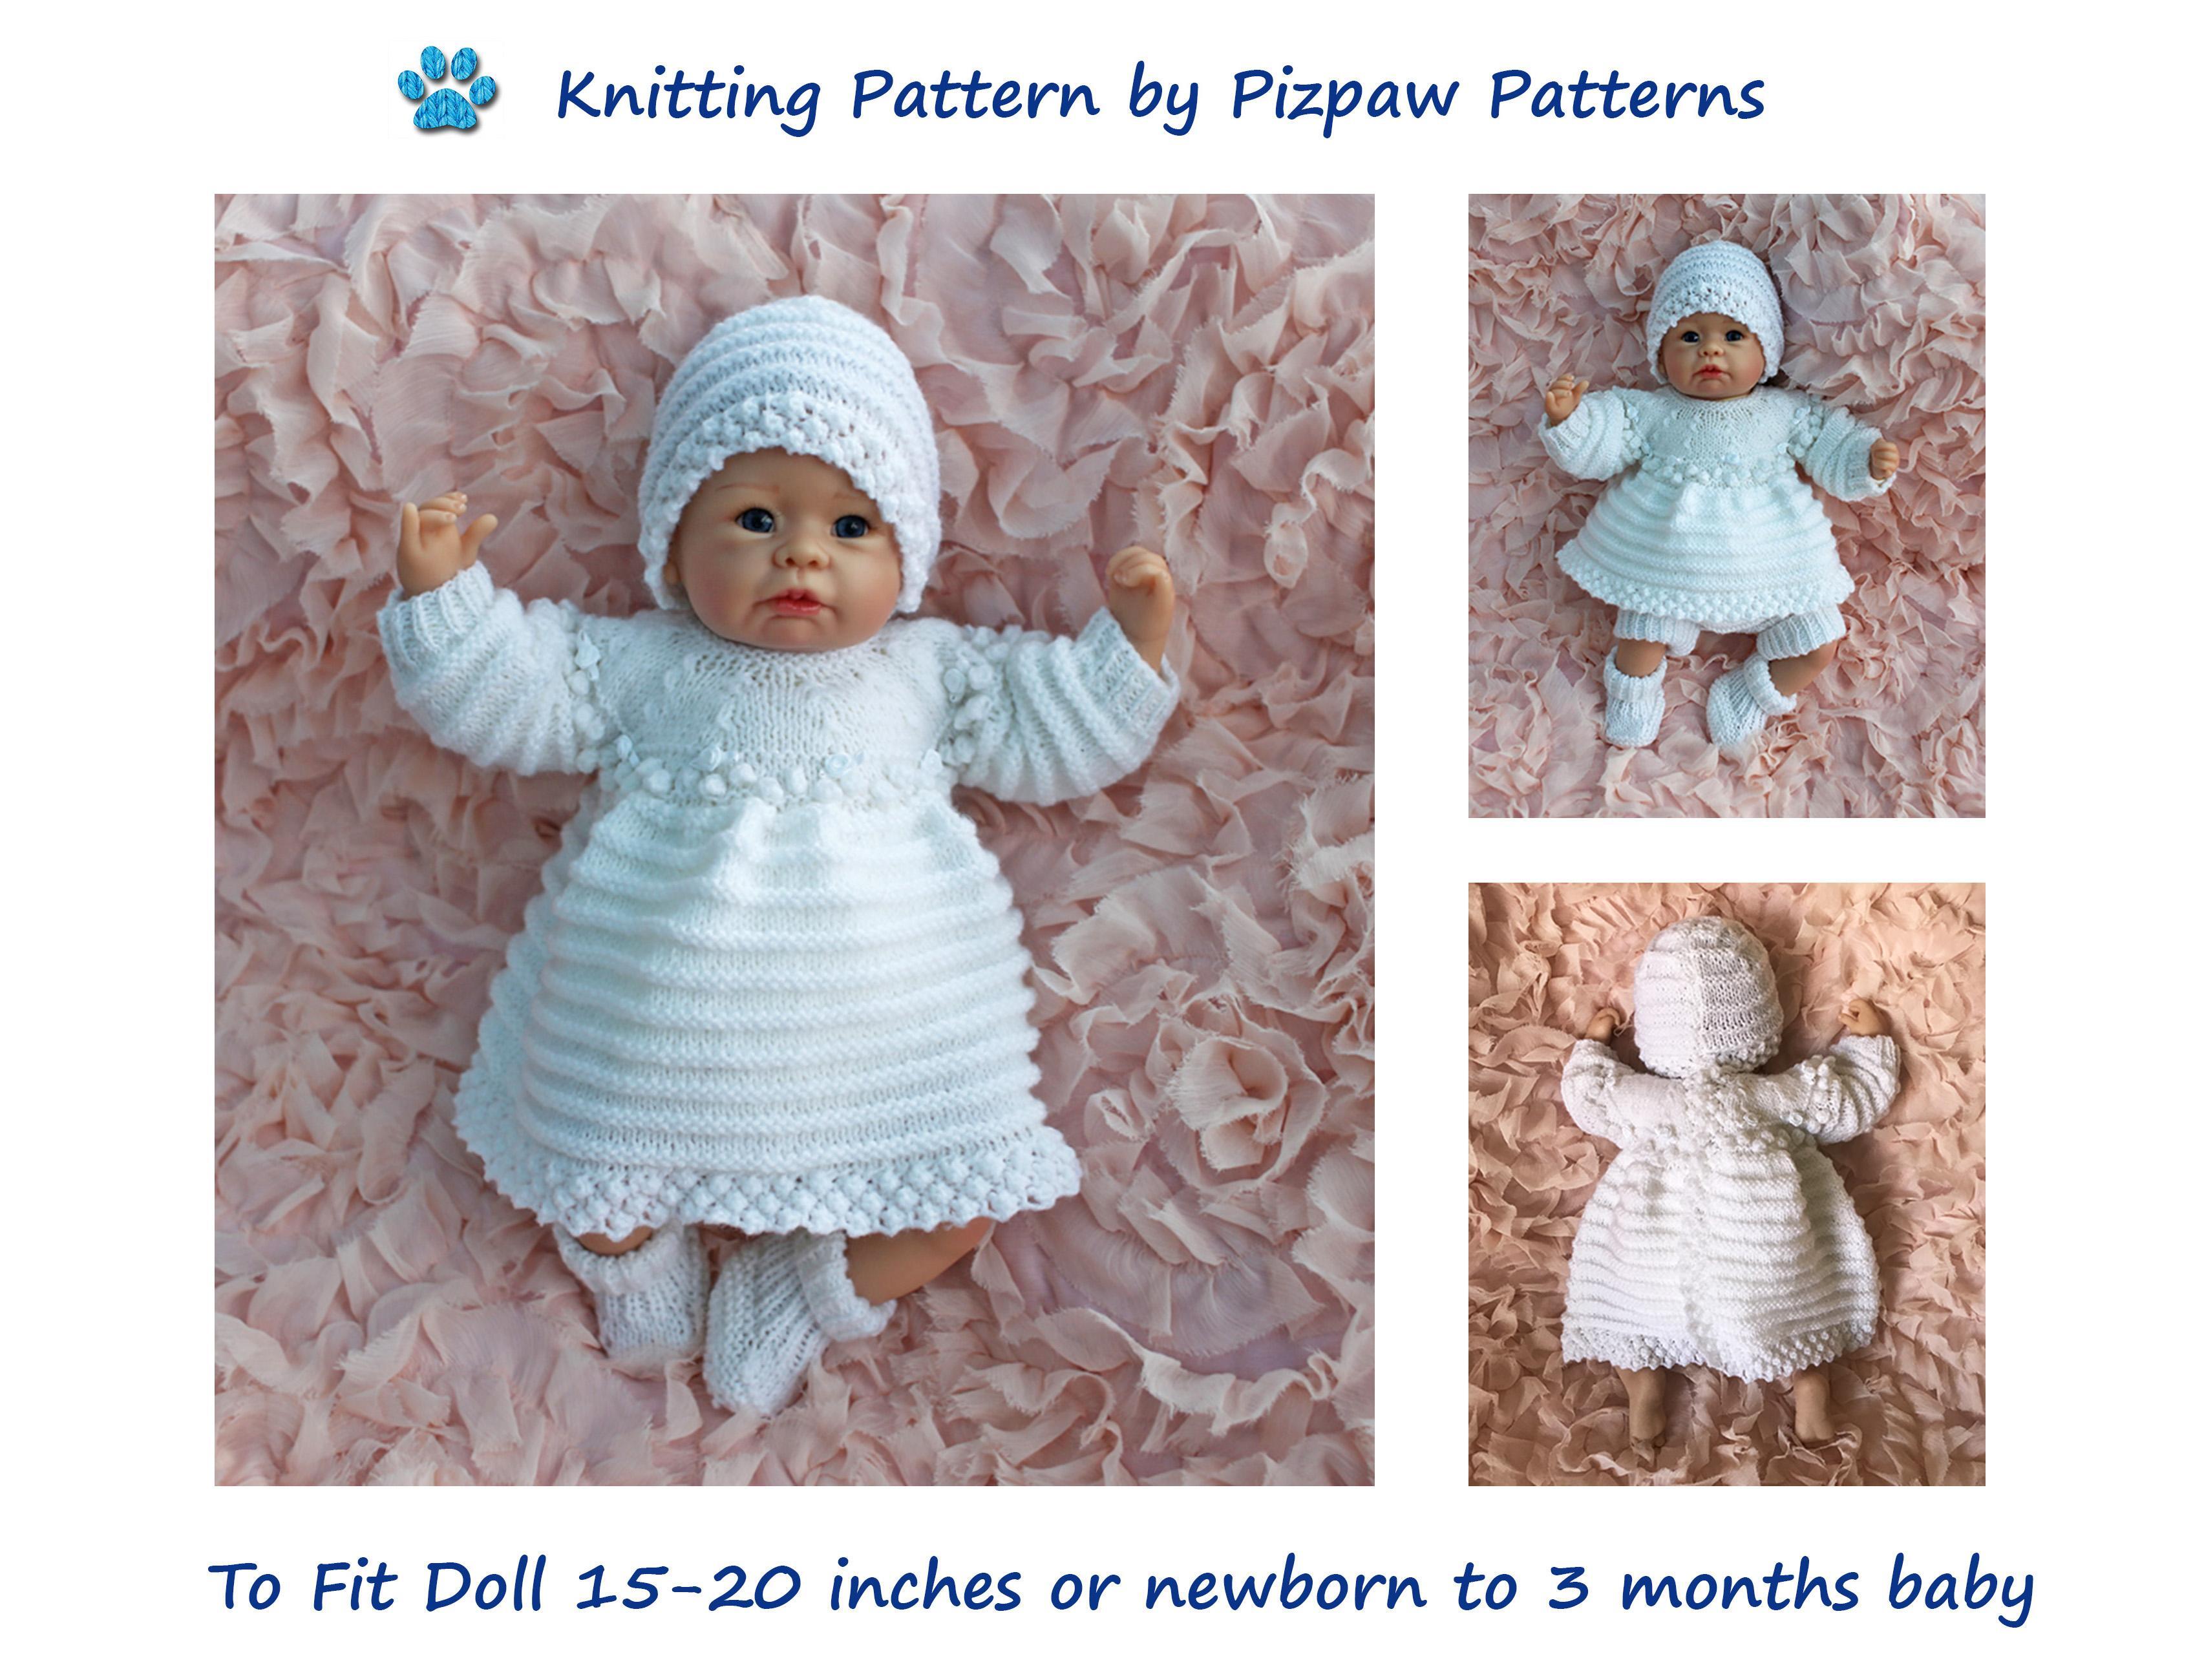 NEW BABY ANGELTOP/DRESS HAND KNITTED 